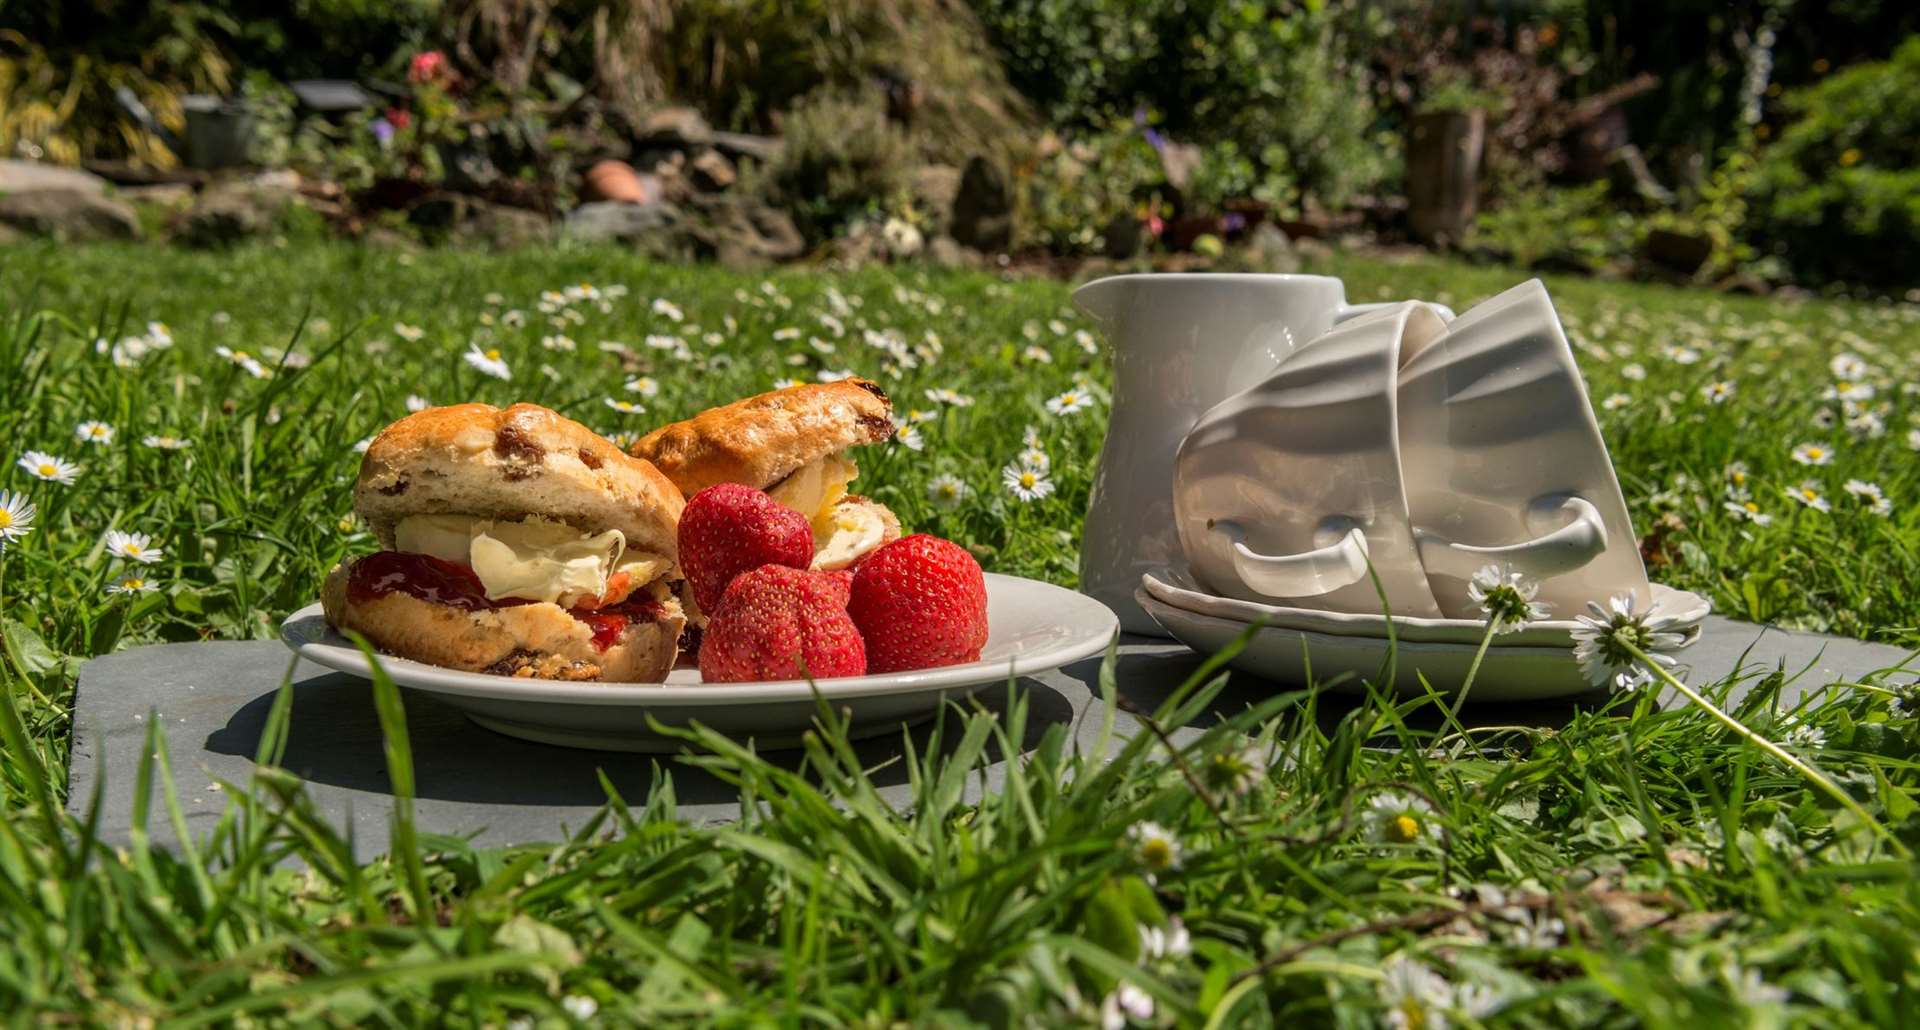 Throw down a blanket and enjoy a picnic lunch. Picture: iStock